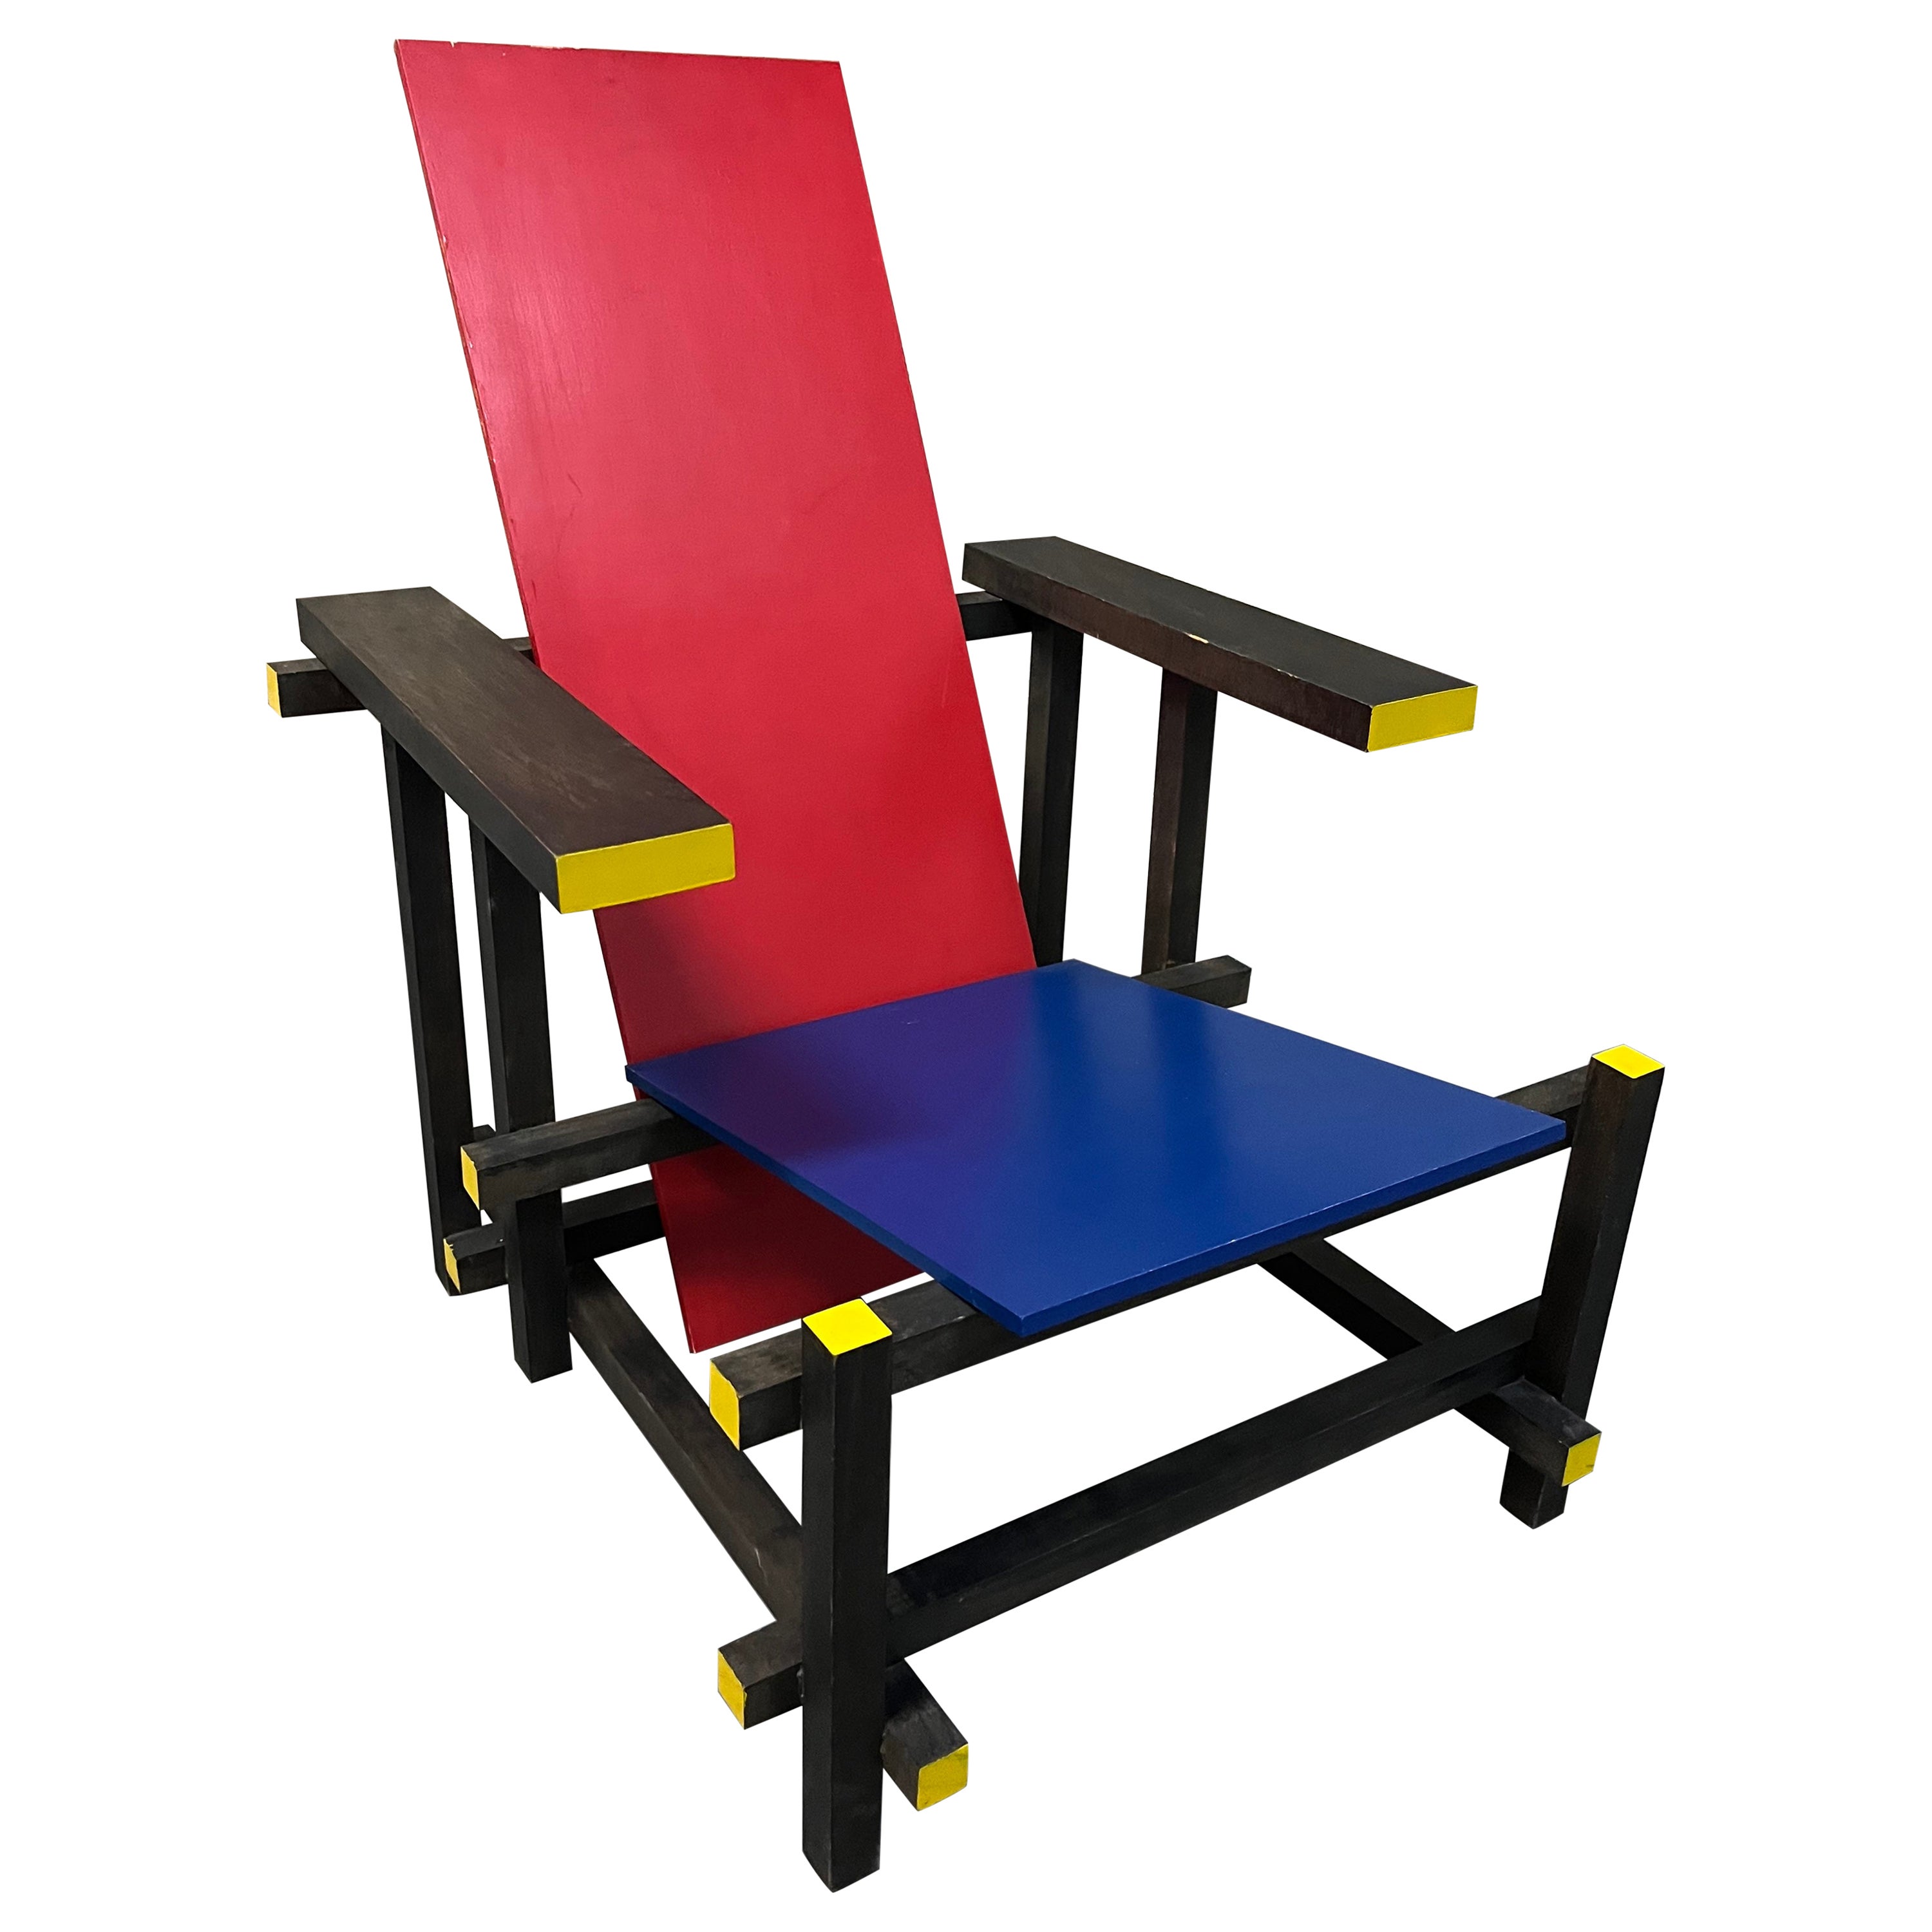 Vintage Reproduction of Gerrit Rietveld's Red and Blue Chair. Circa 1960s For Sale